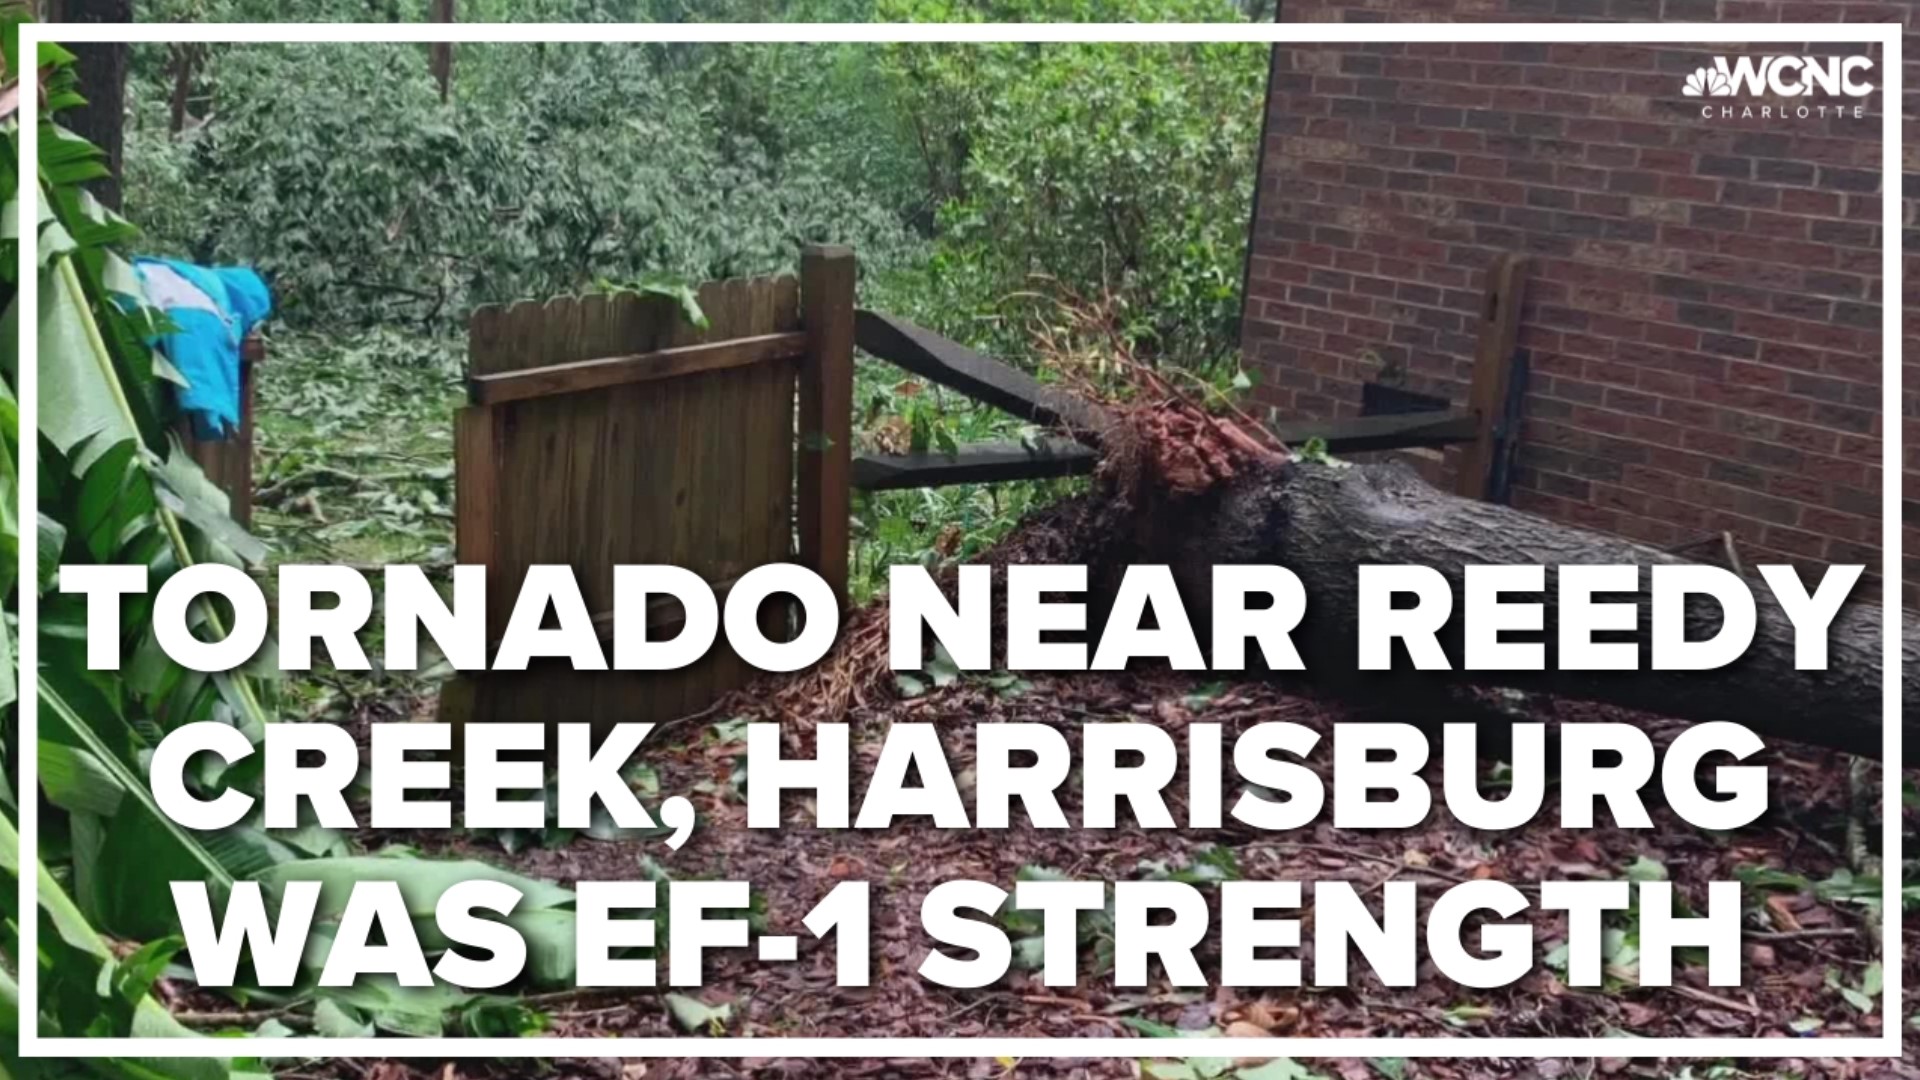 The national weather service confirms a tornado touched down in the Charlotte area.